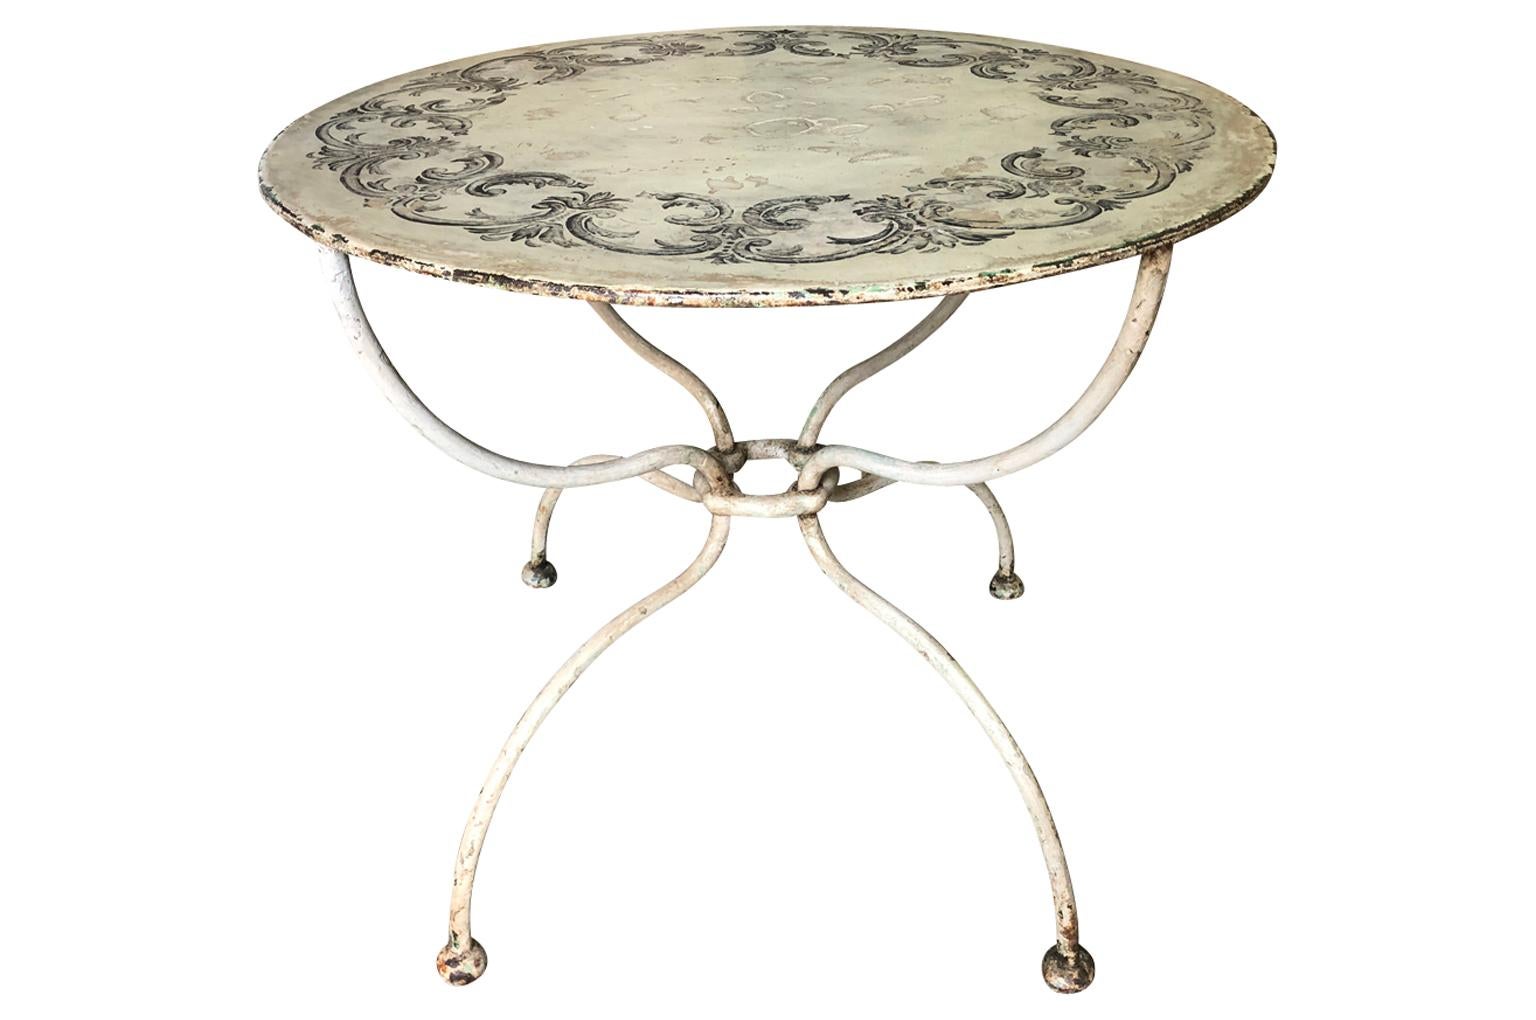 Painted French 19th Century Garden Table